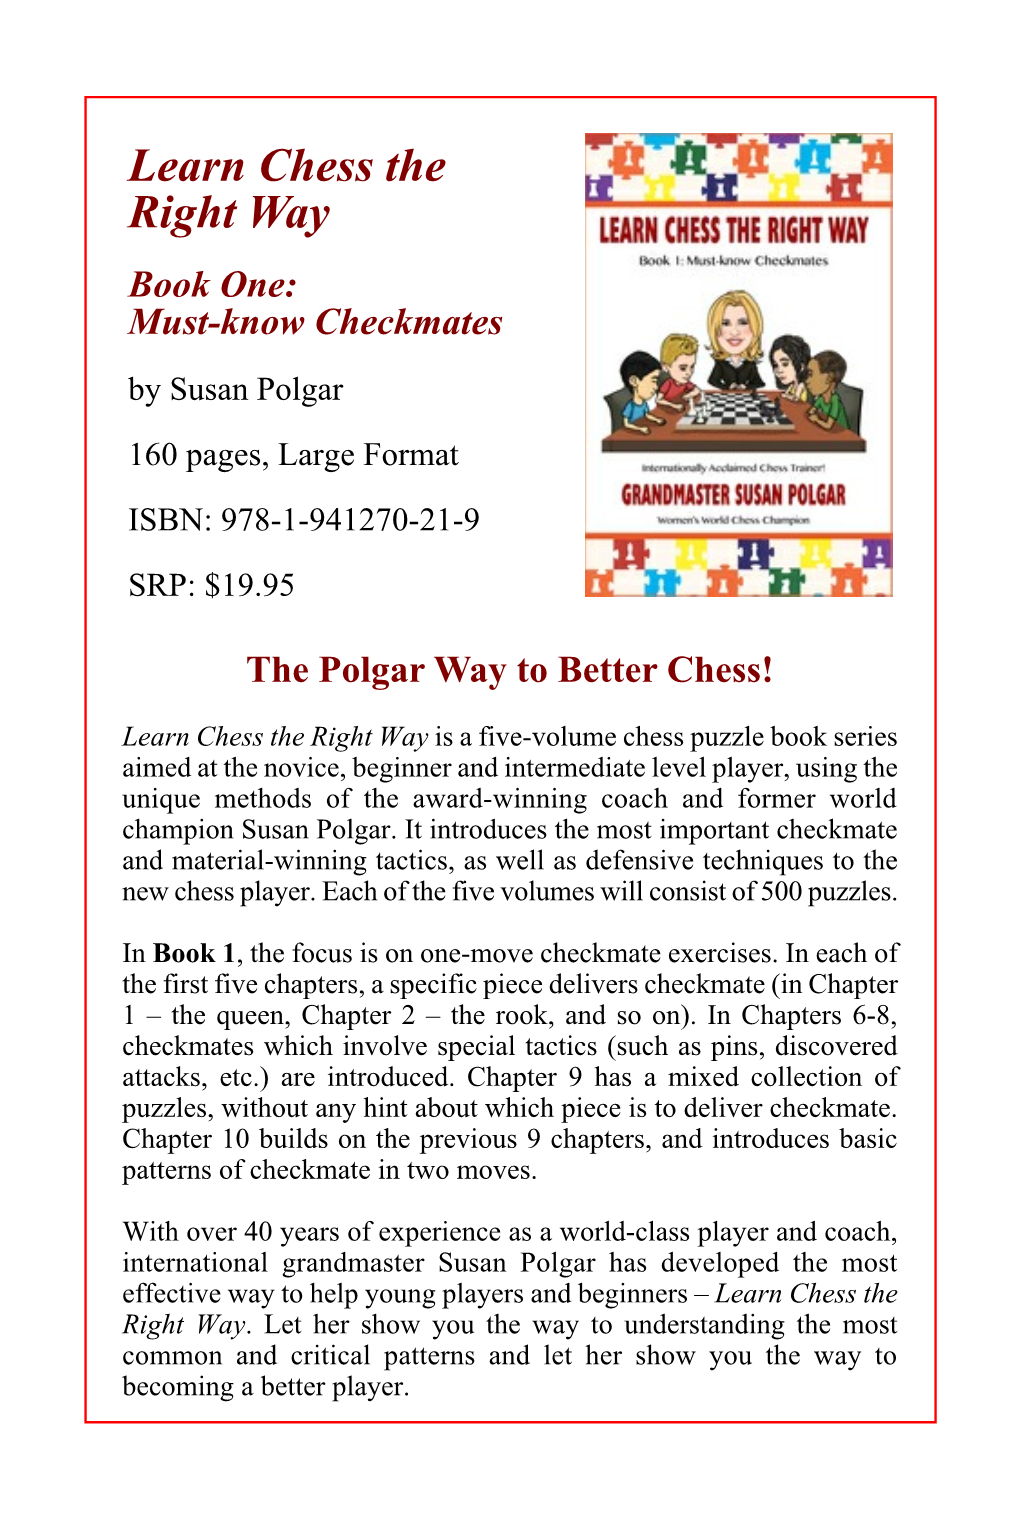 Learn Chess the Right Way Book One: Must-Know Checkmates by Susan Polgar 160 Pages, Large Format ISBN: 978-1-941270-21-9 SRP: $19.95